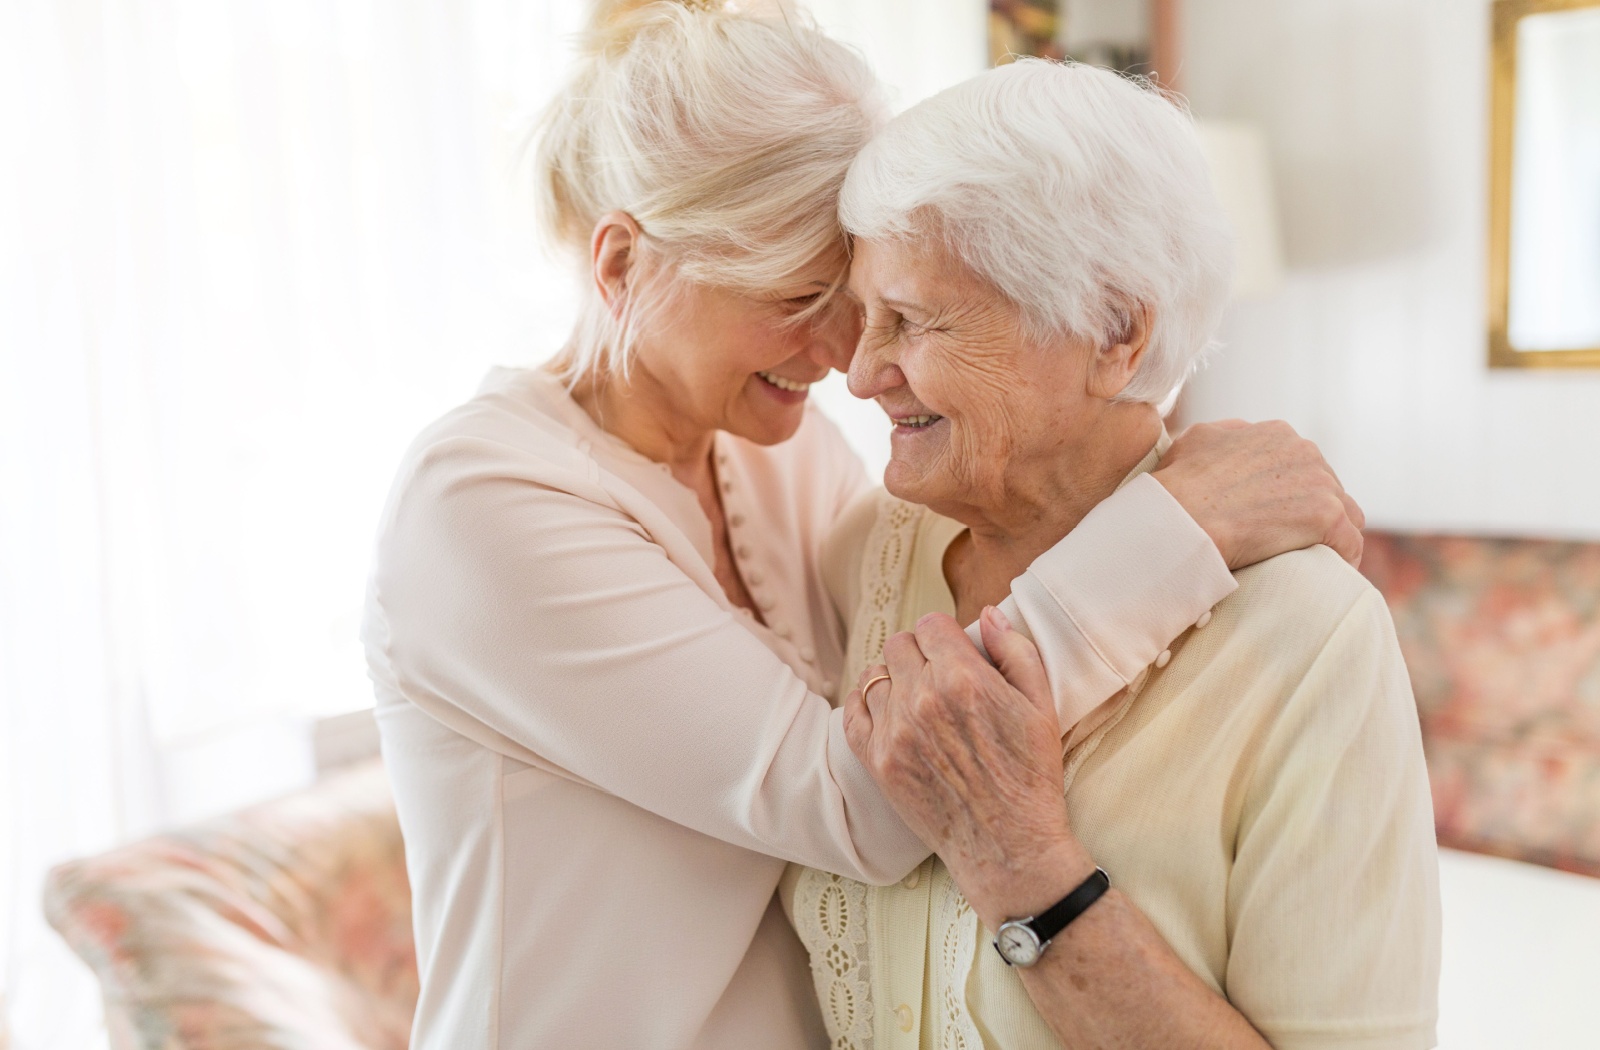 A happy and smiling adult daughter and elderly mother in a warm embrace.